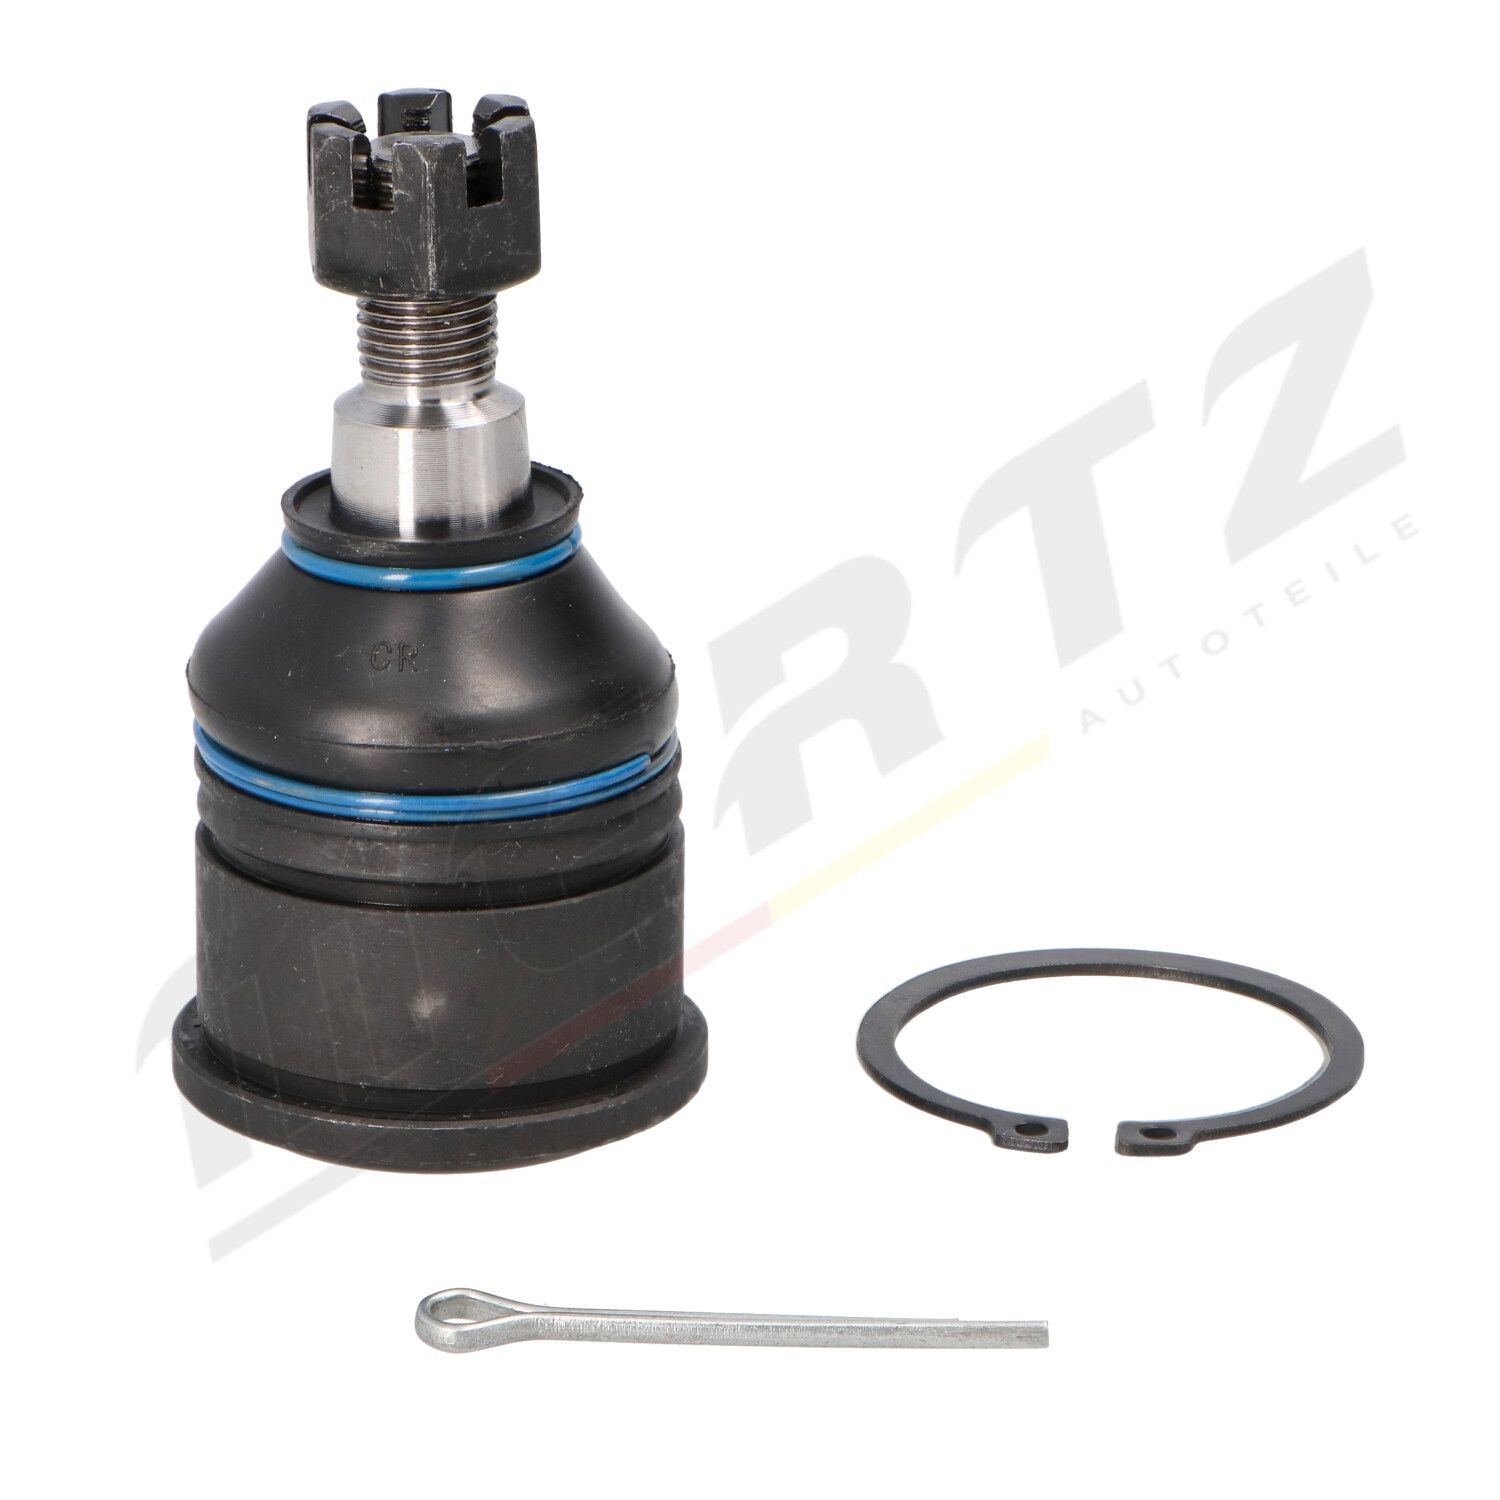 MERTZ Front Axle Left, Front Axle Right, with retaining ring, with crown nut, M12x1,25mm Suspension ball joint M-S0535 buy